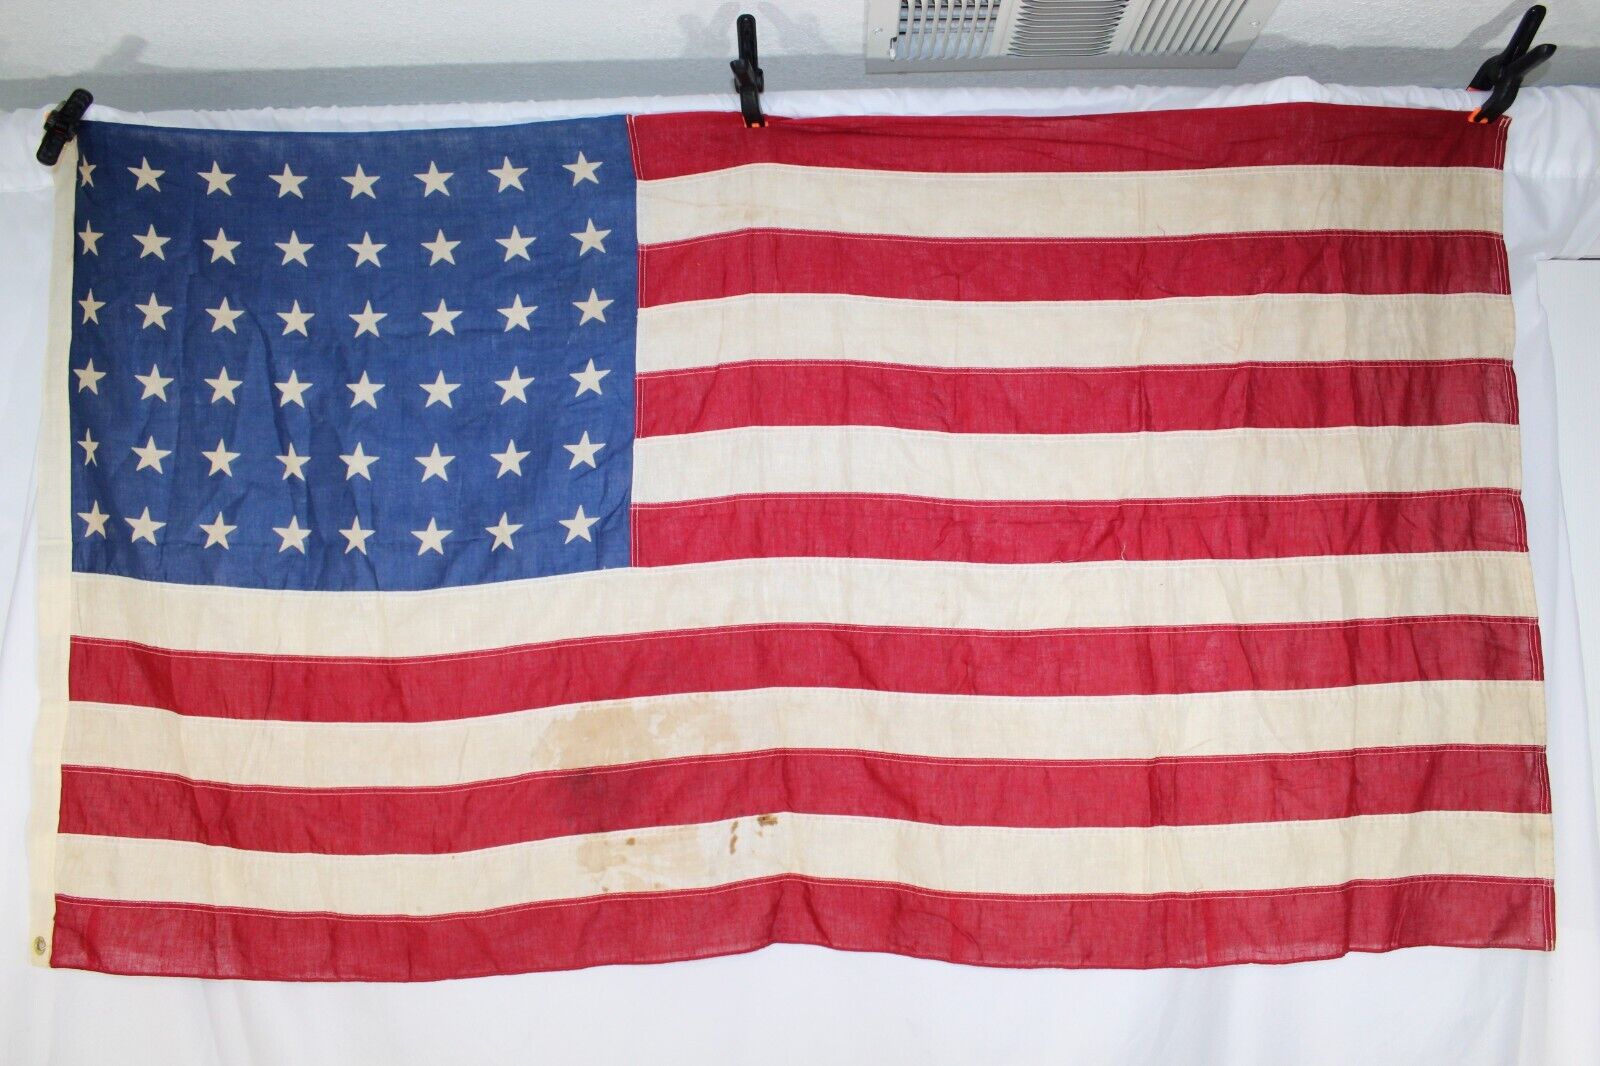 48-Star US American Flag Vintage Cotton Valley Forge Flag Co. 1940s 3ft x 5ft